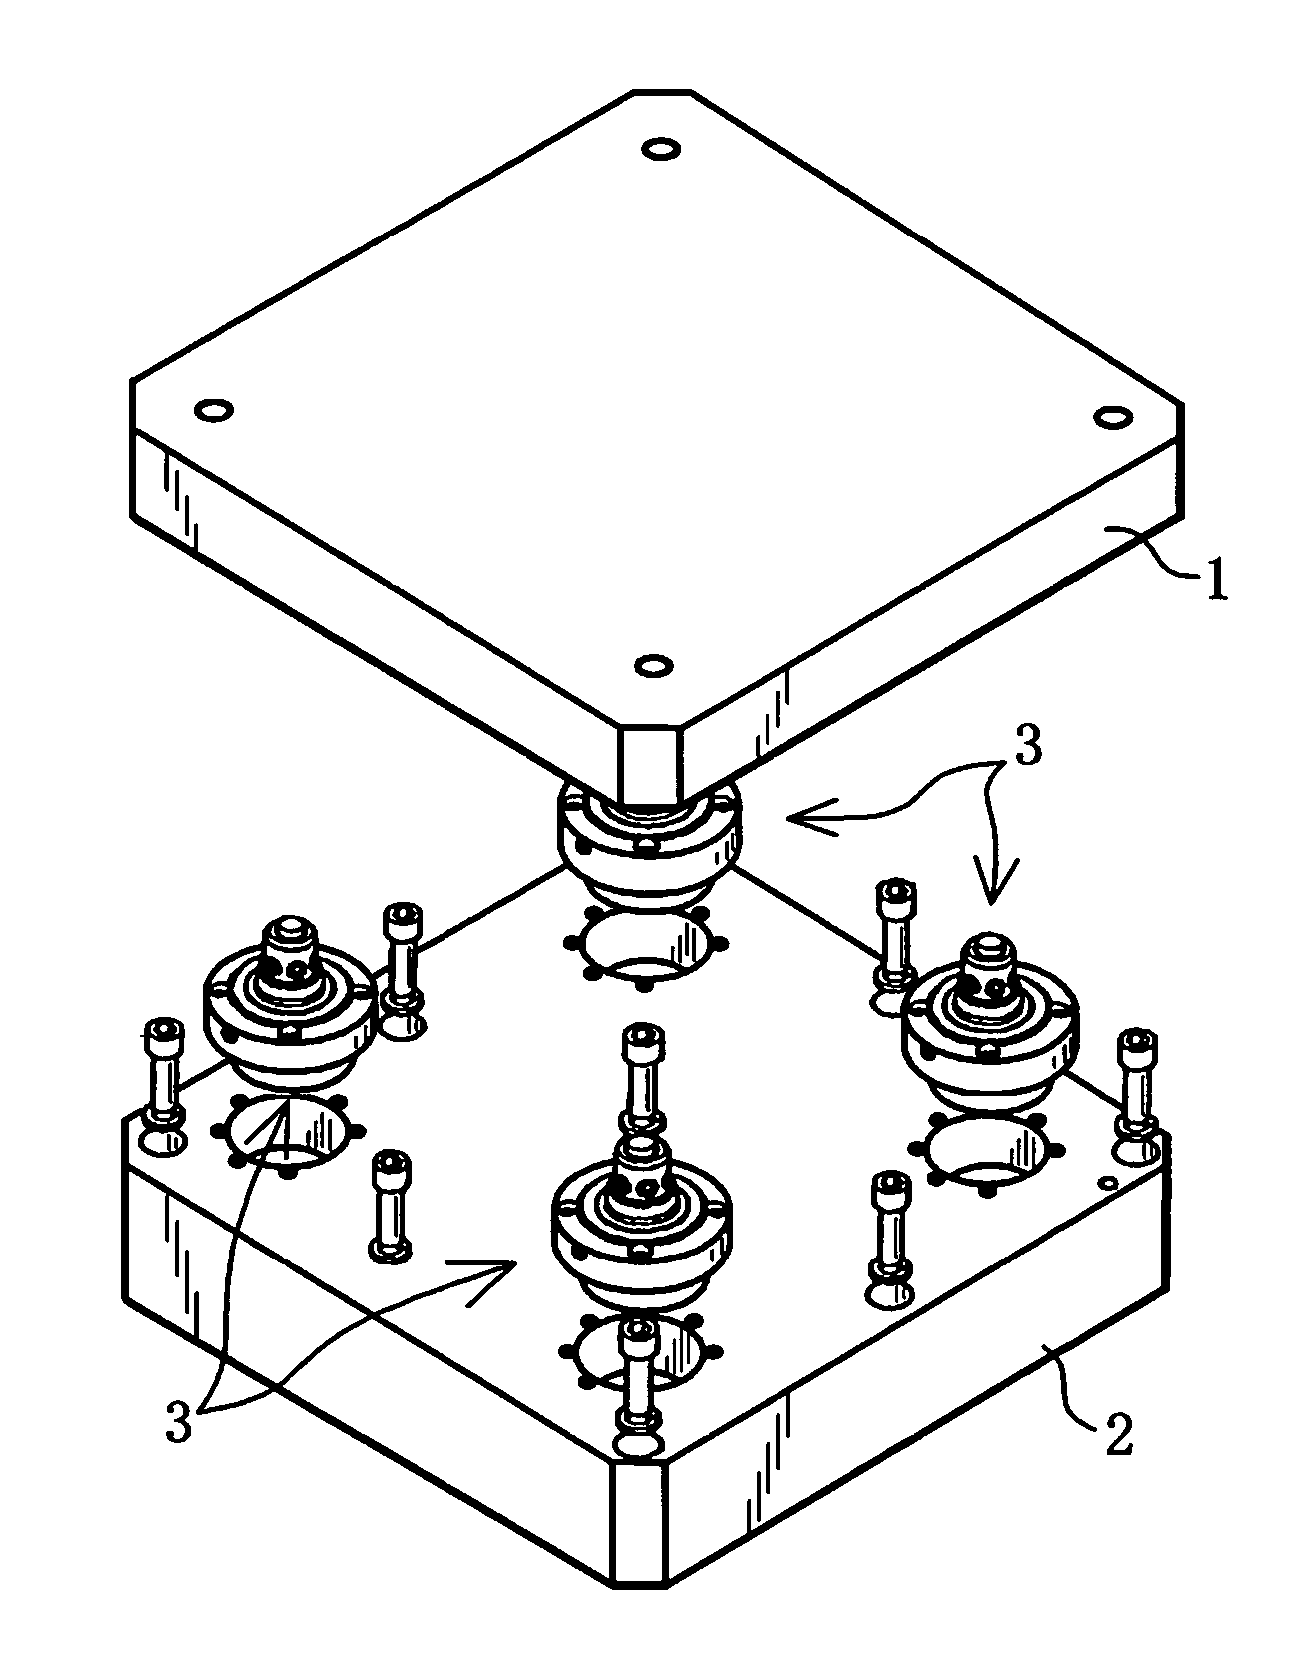 Clamp device